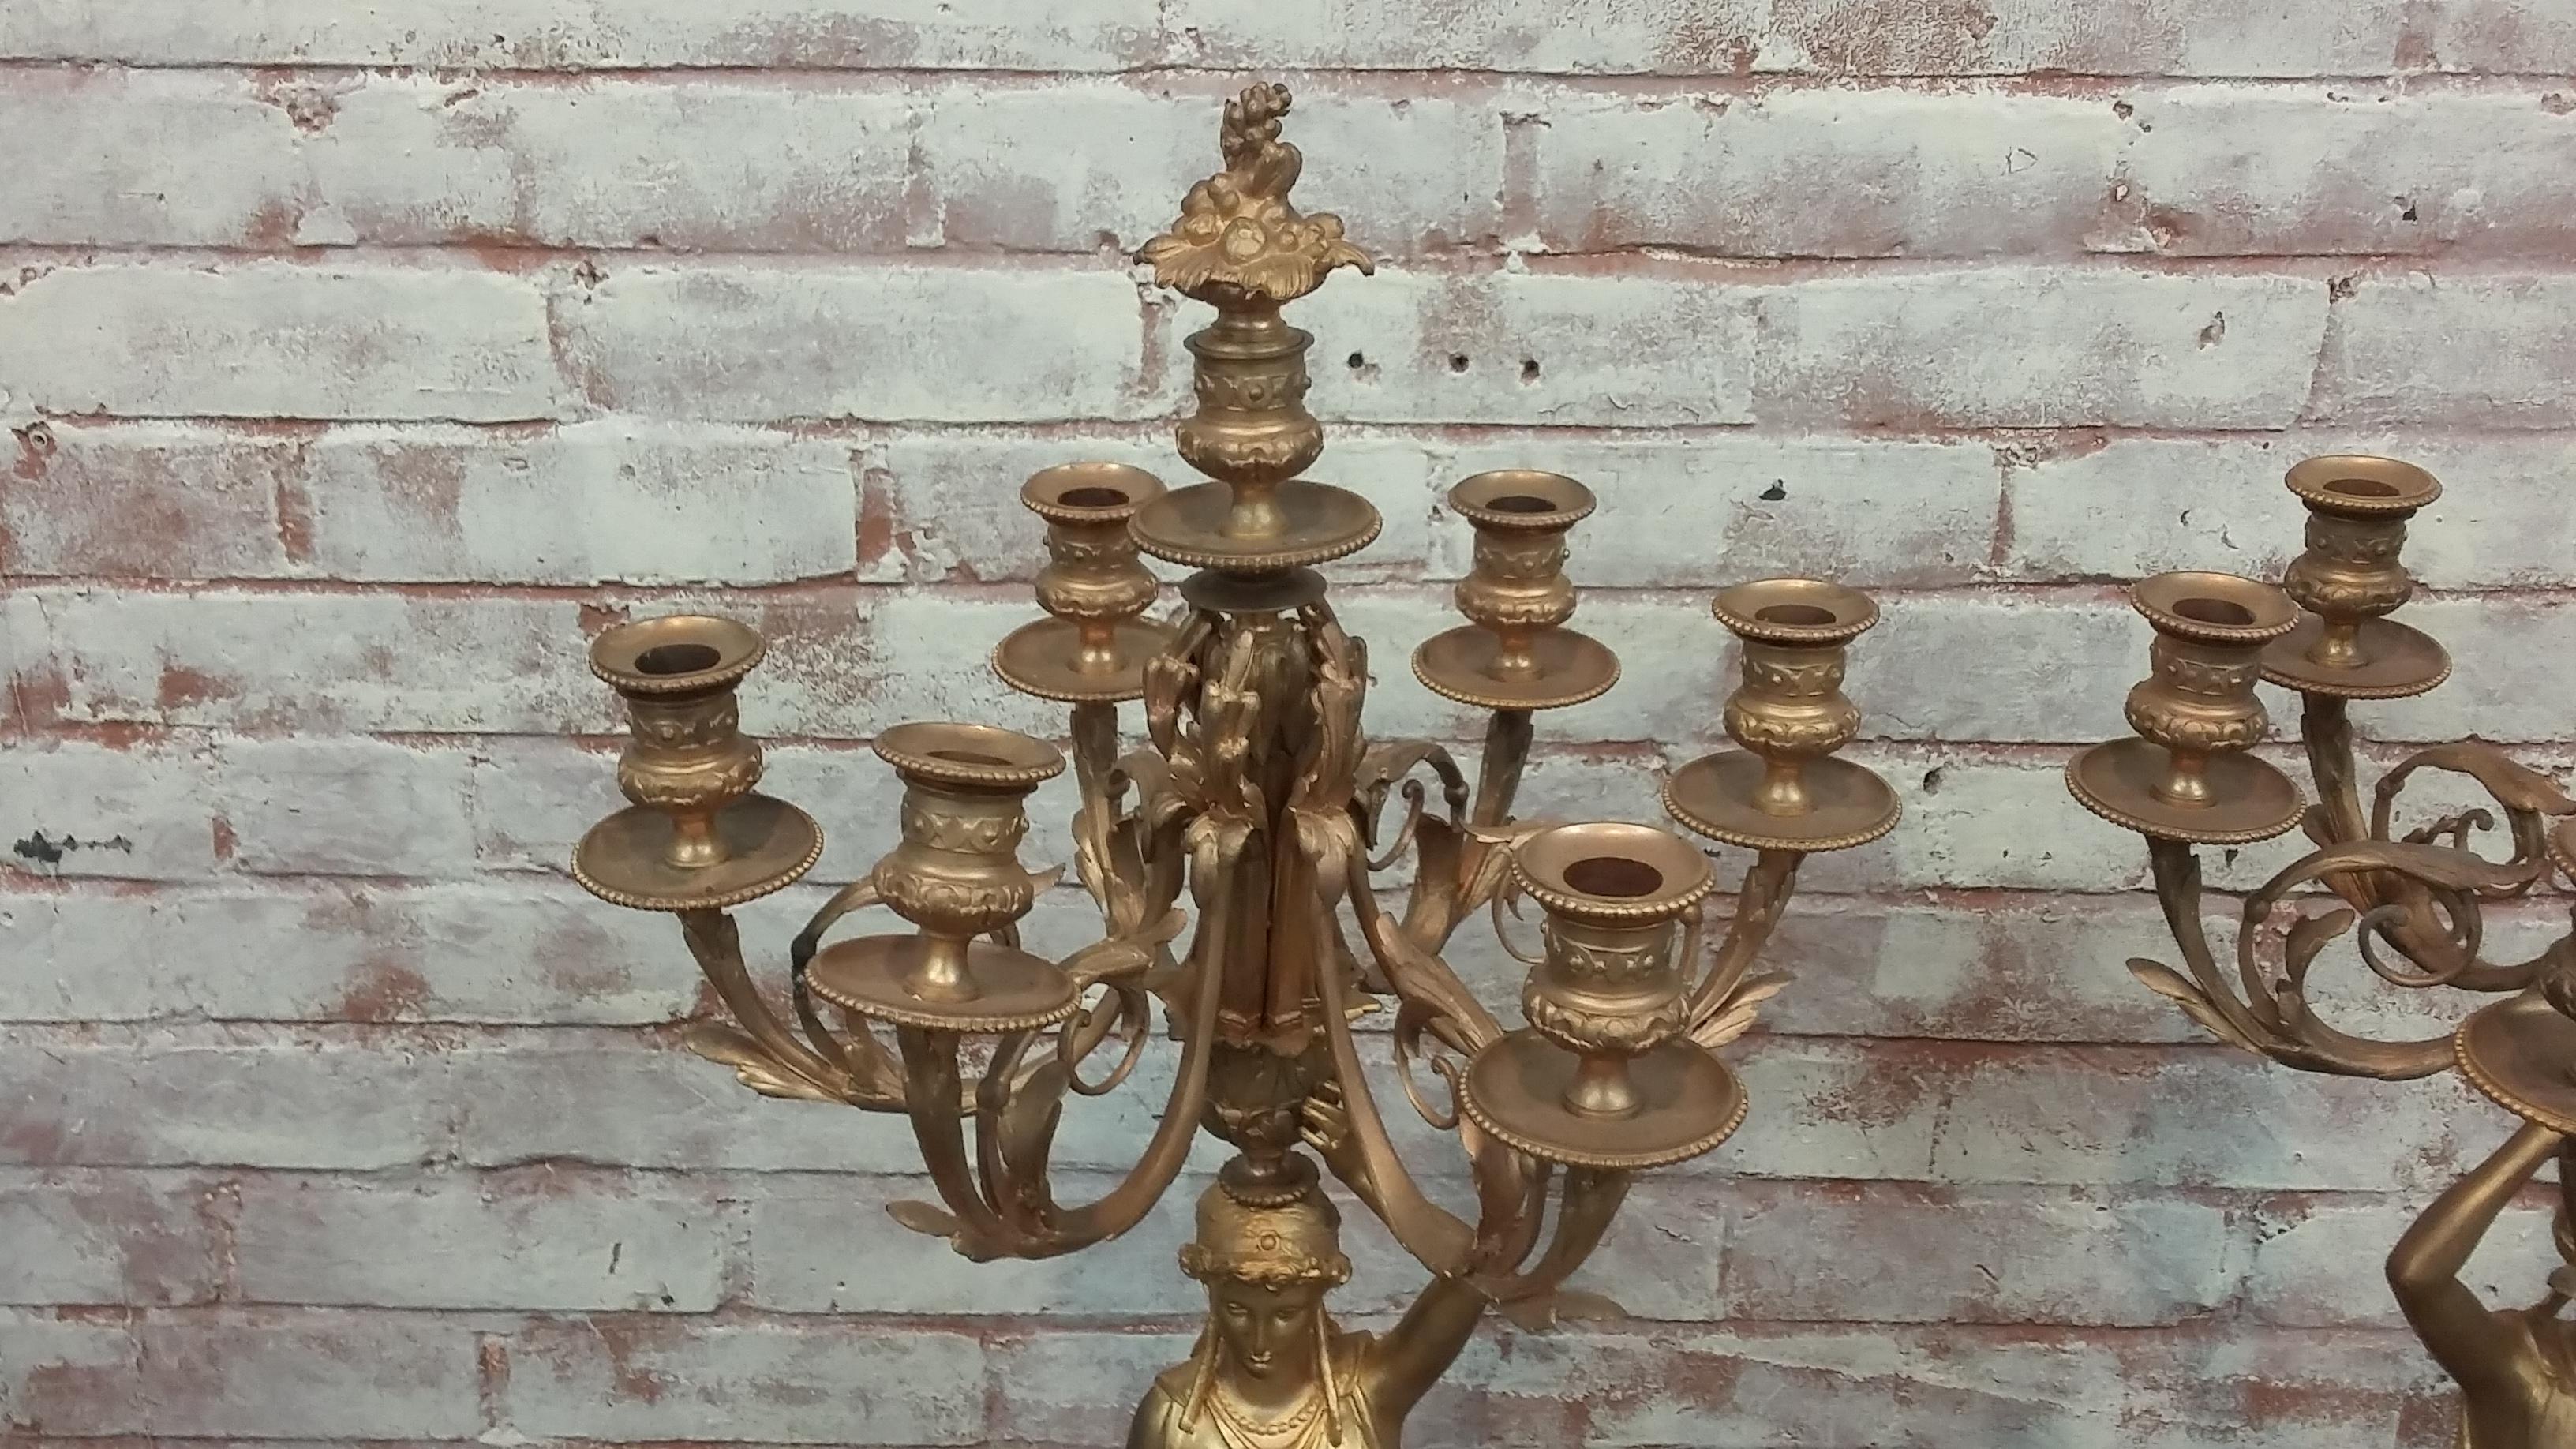 Pair of 20th century fine crafted bronze candelabras. Figural design in a gold painted finish. Two similar women (left and right) with six candle arms each as well as a candleholder at the very top.